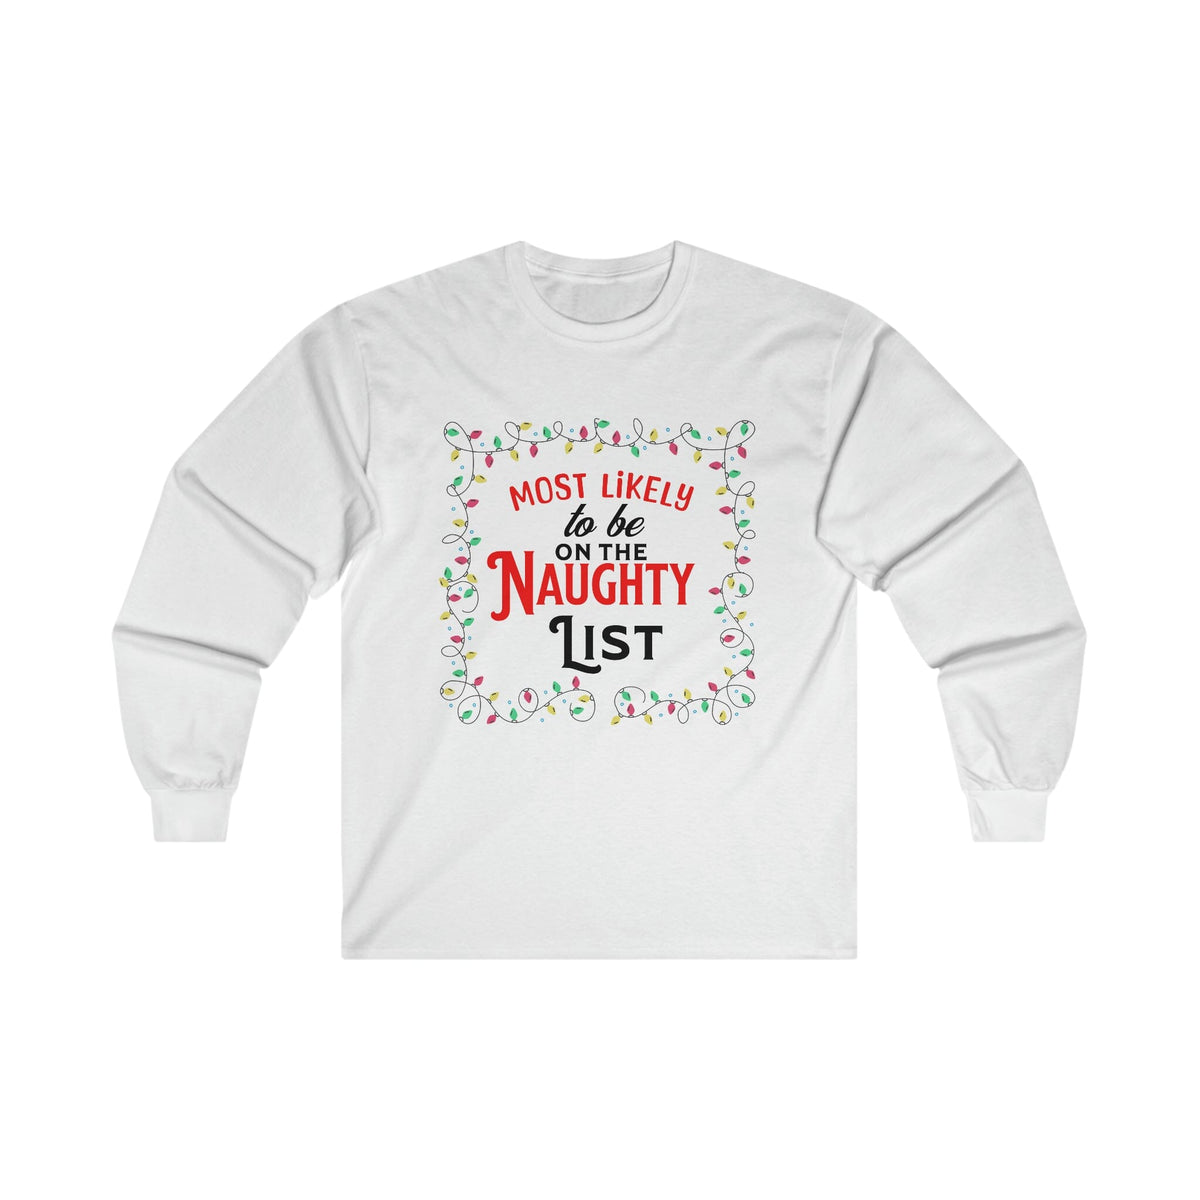 Naughty List" Exclusive Holiday Sweater Long-sleeve Printify S White 